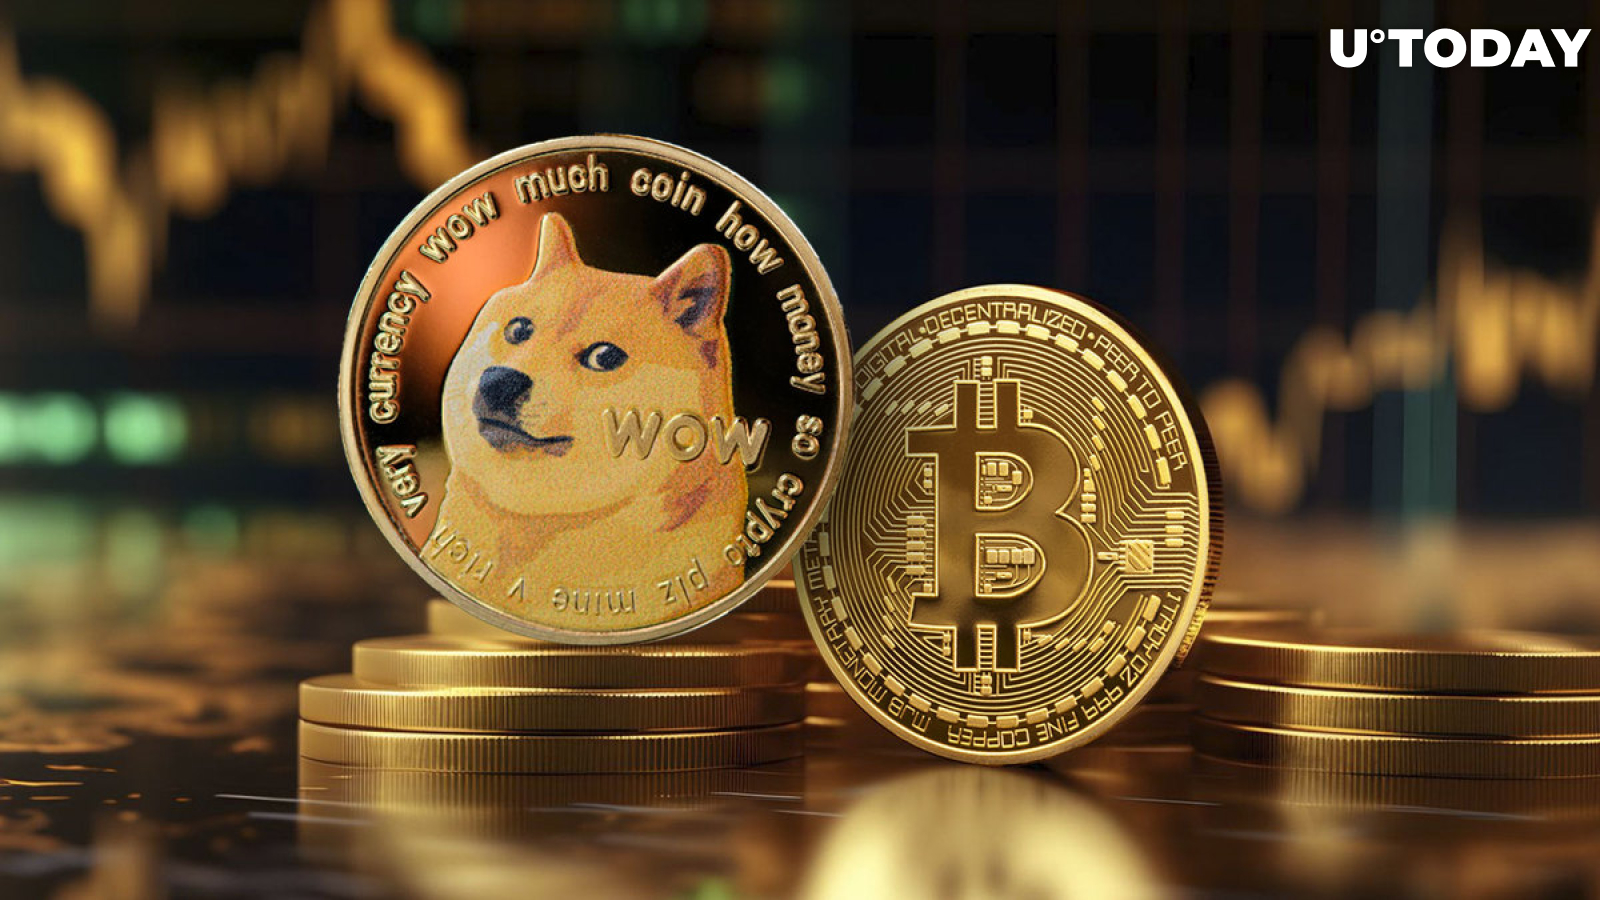 Dogecoin (DOGE) Founder Expects Bitcoin (BTC) to Pull Back Lower After New ATH